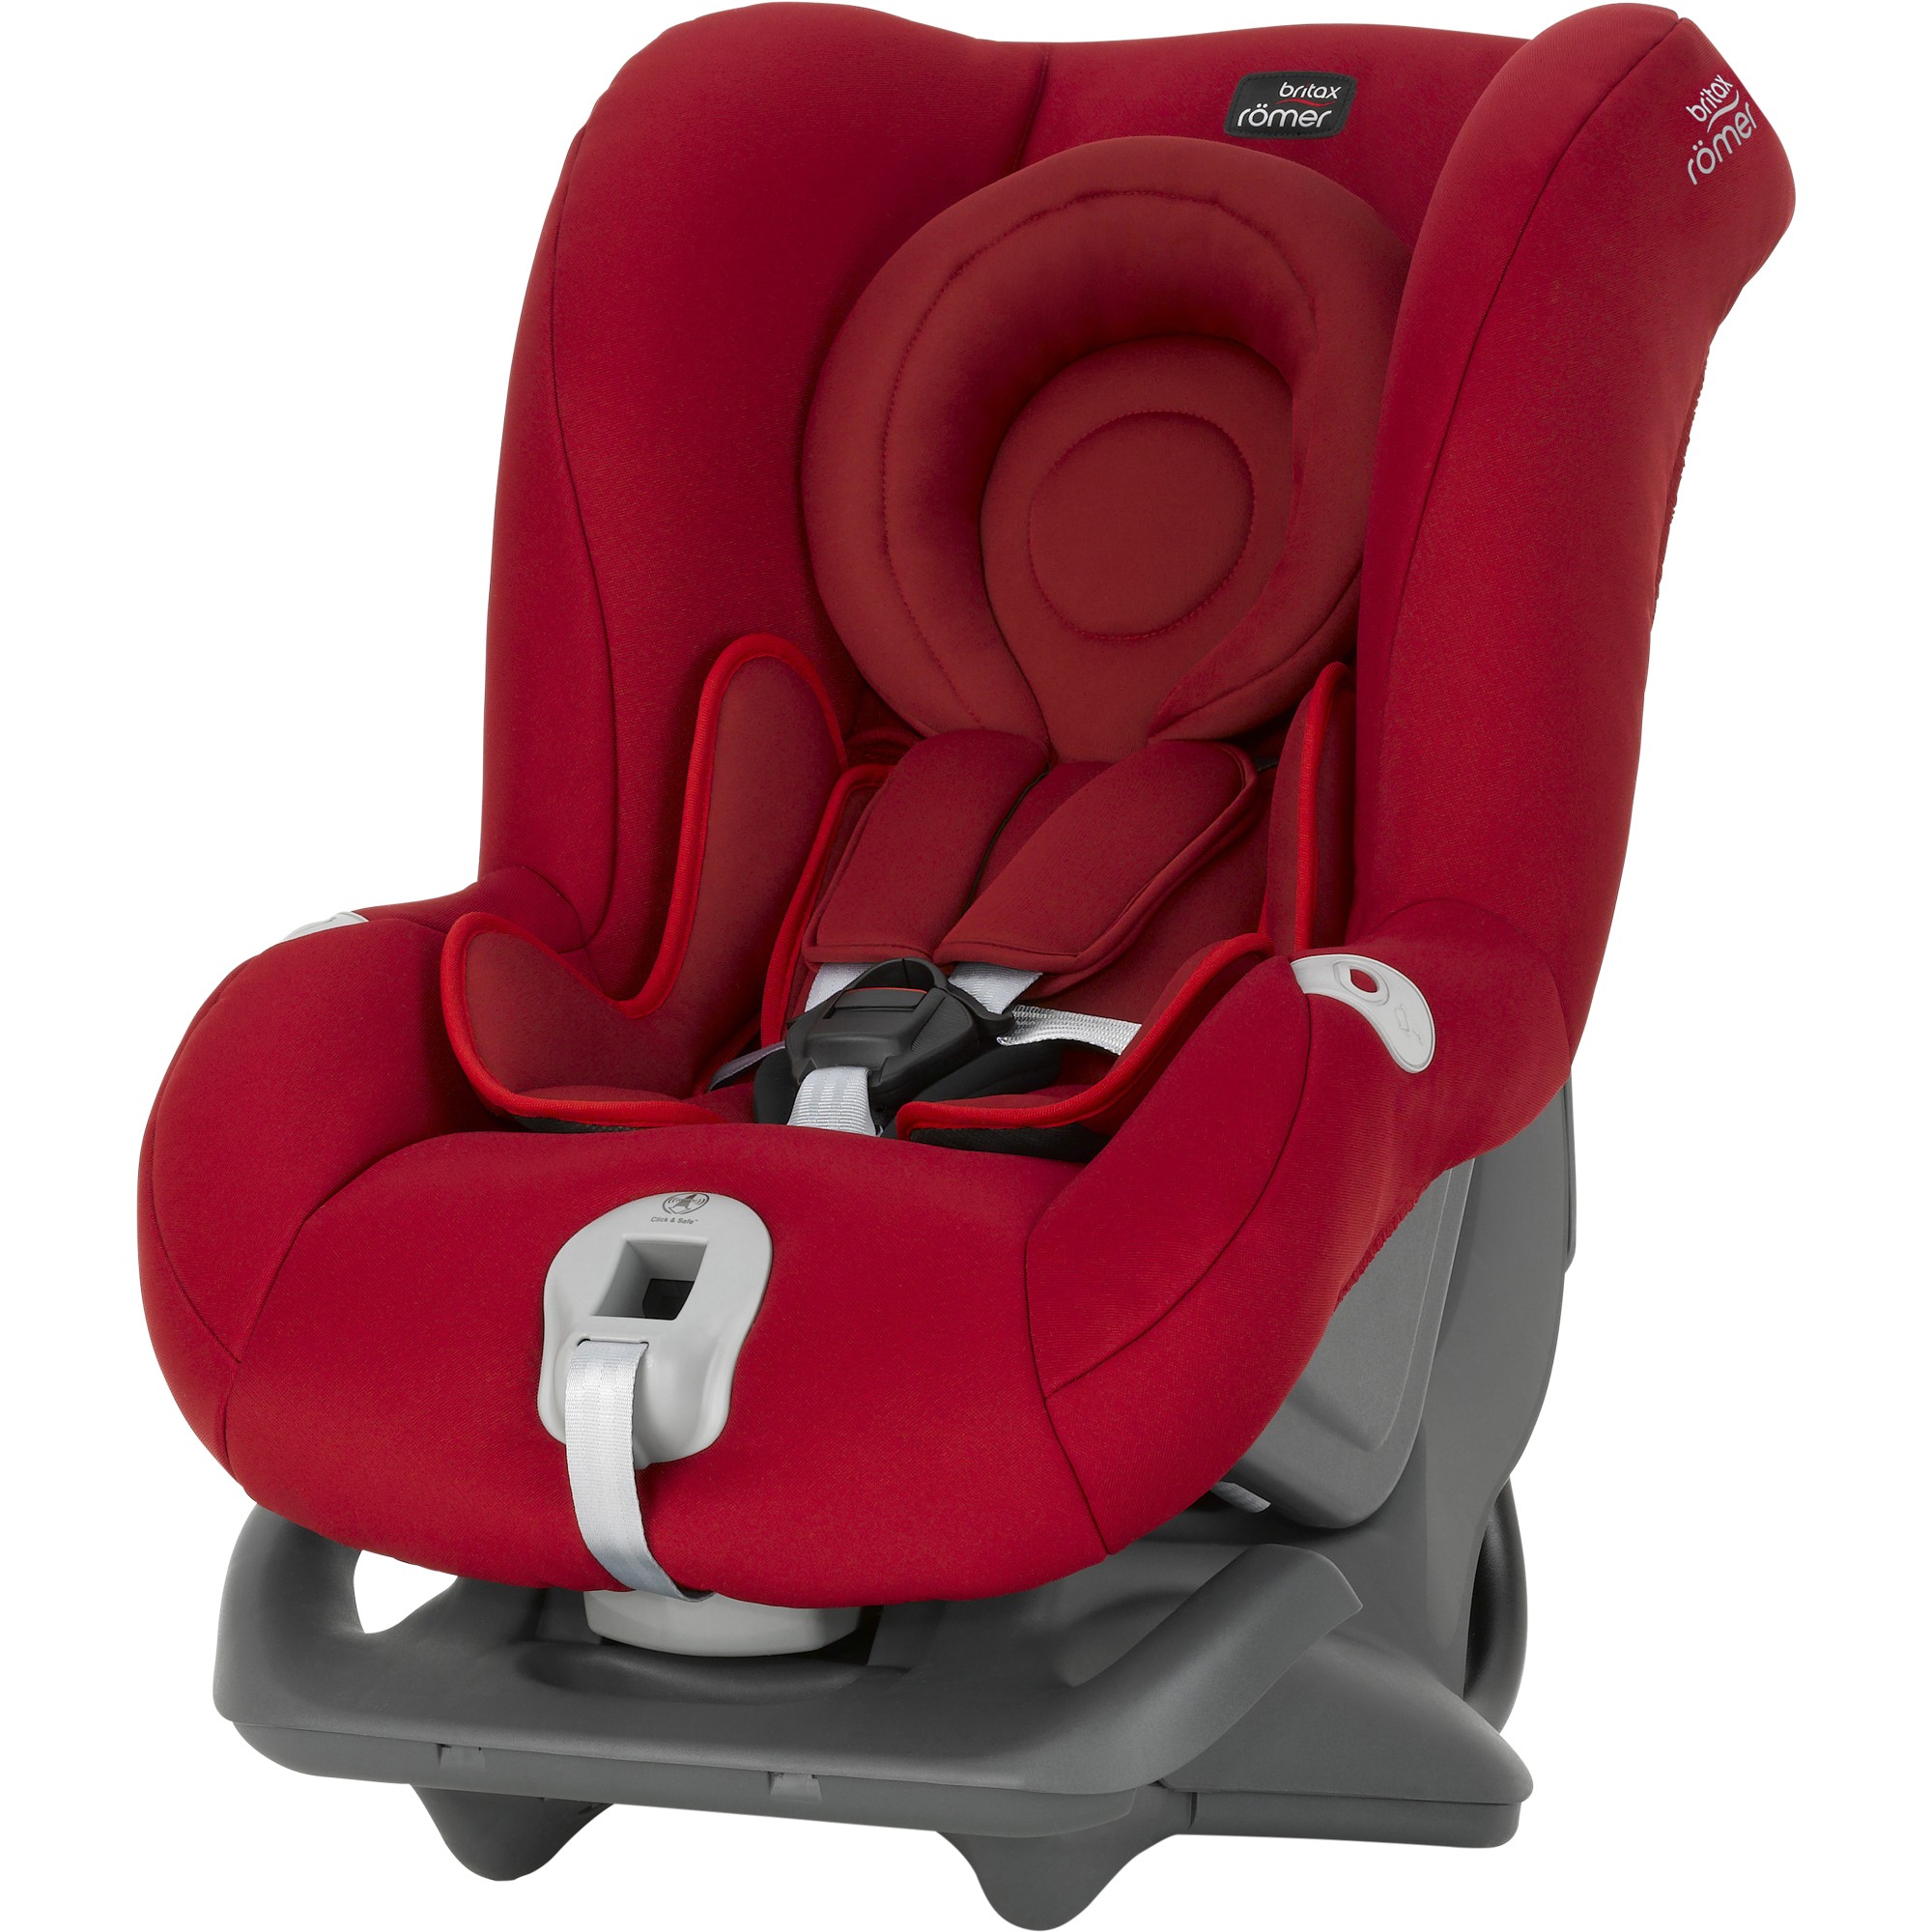 Britax First Class plus 2016 Flame Red